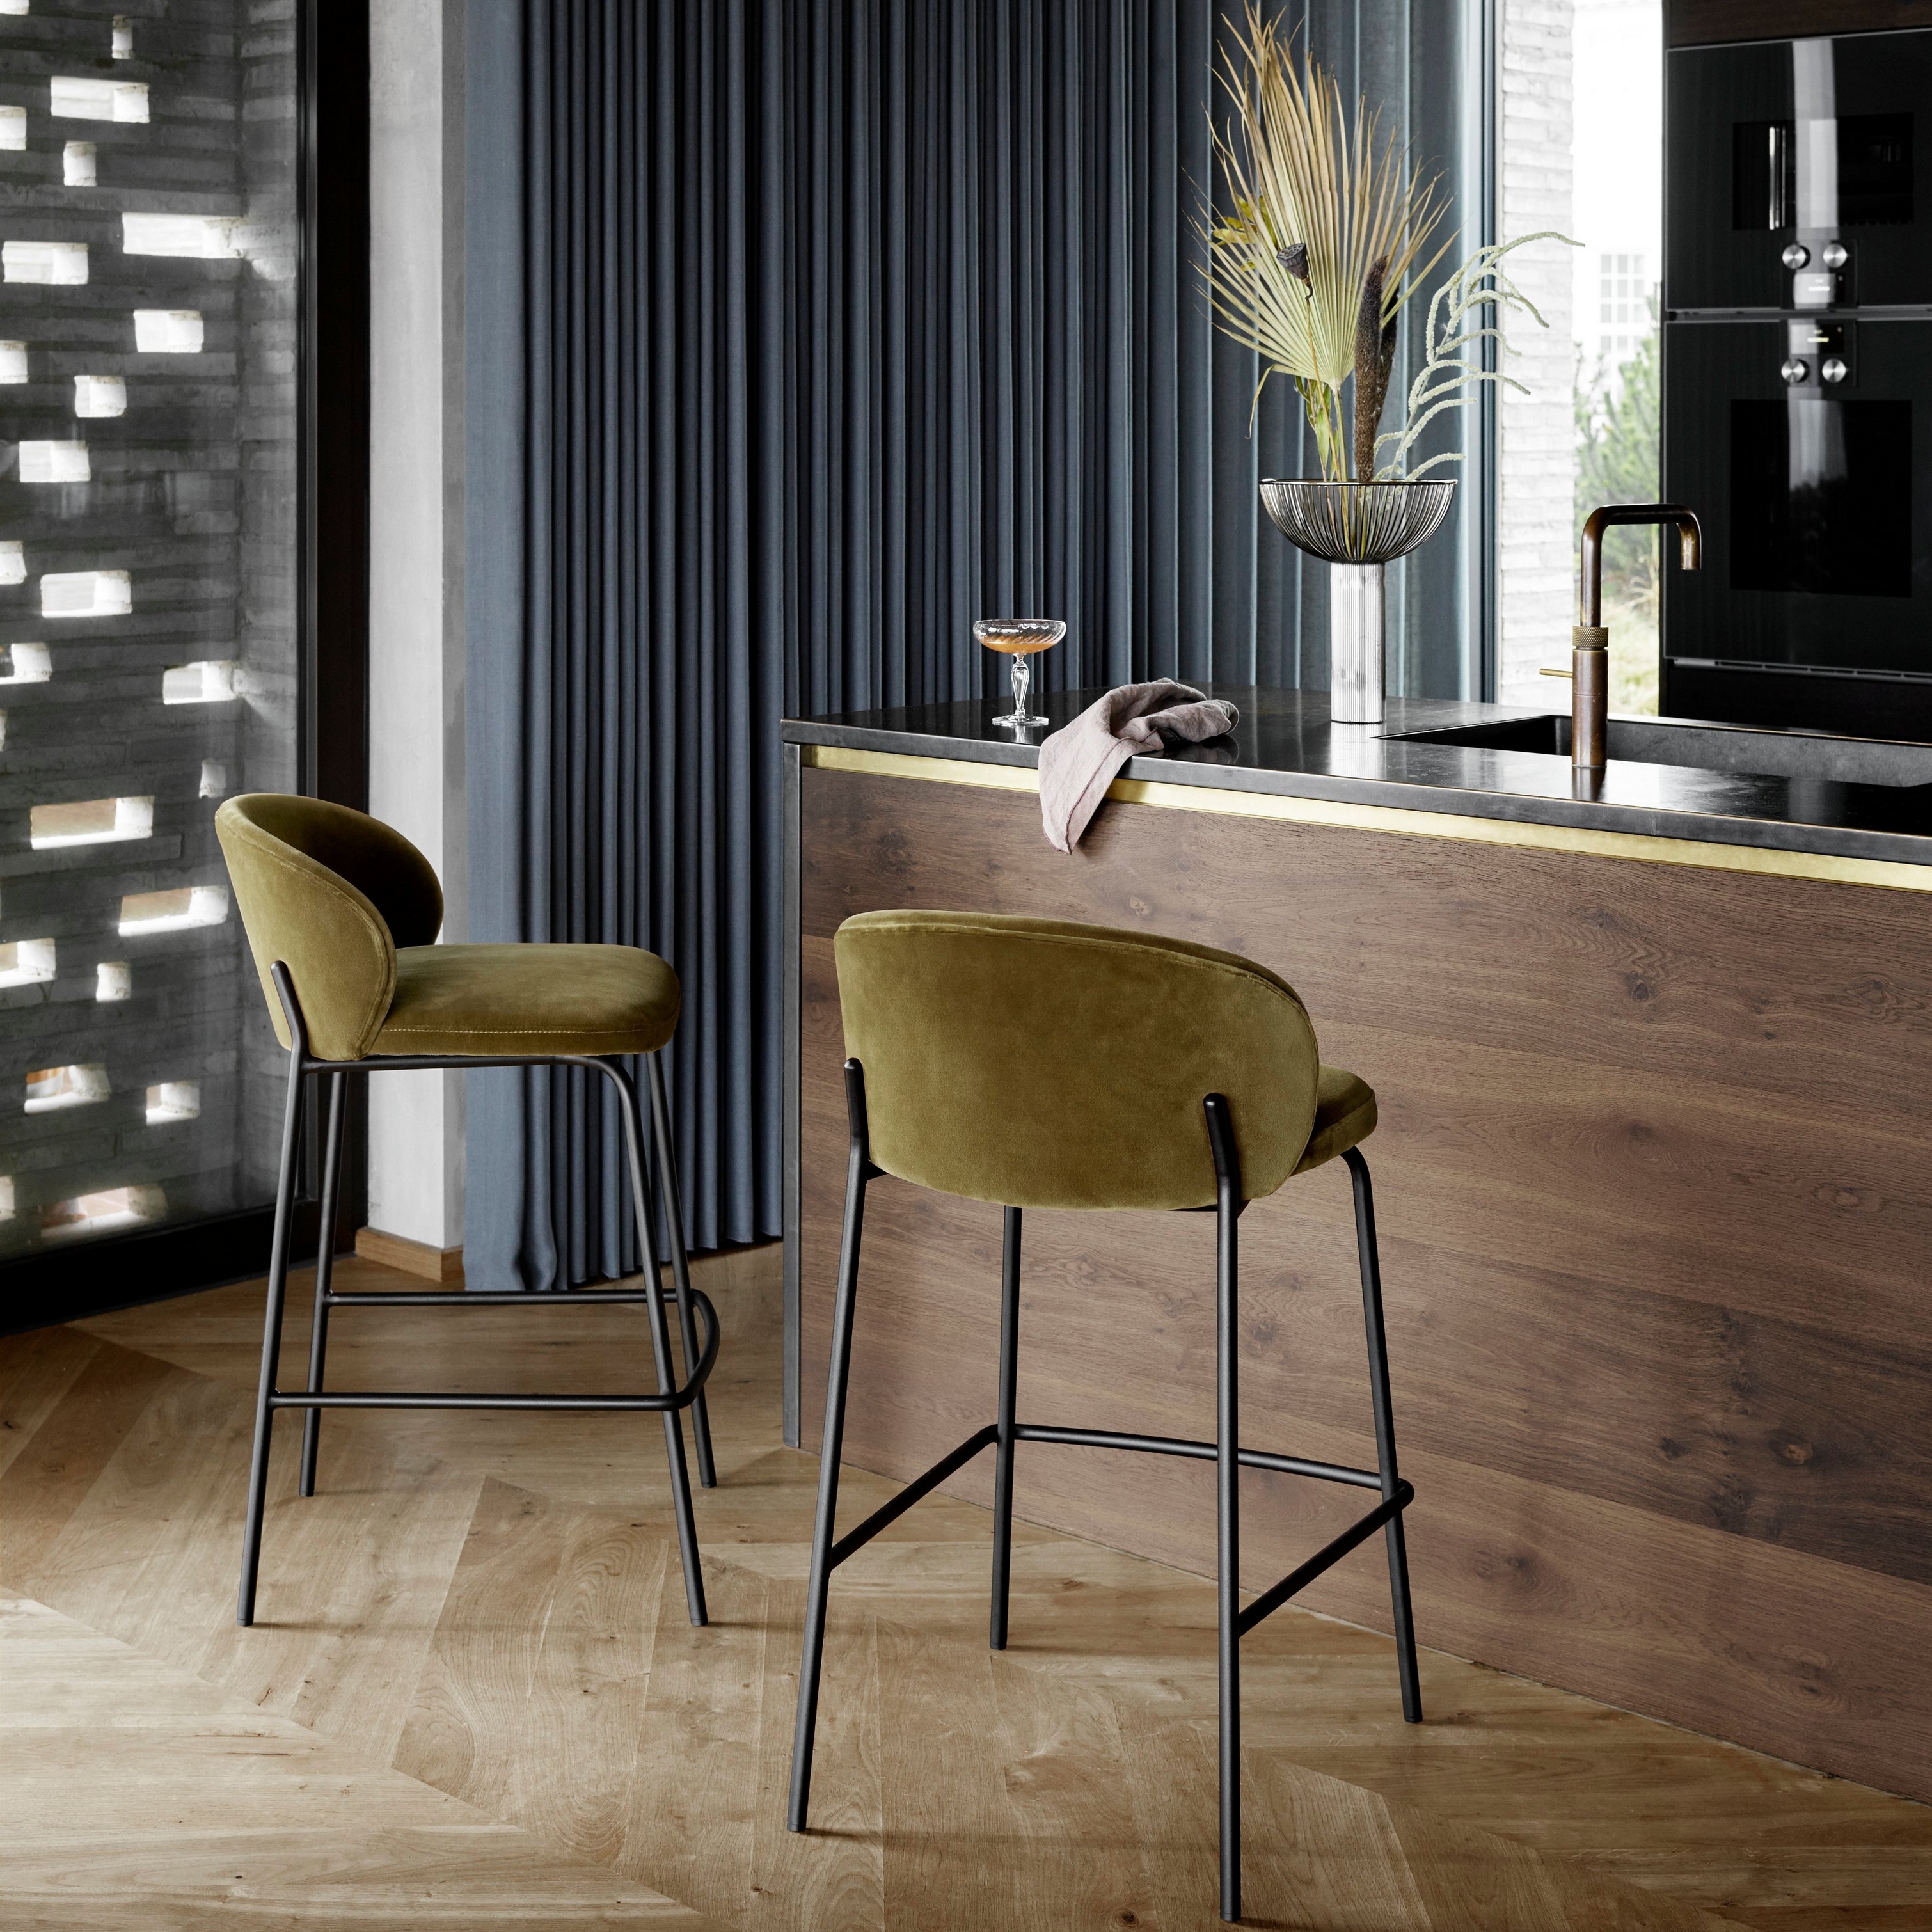 Velvet bar stools at a wooden kitchen counter with black appliances and pendant light.